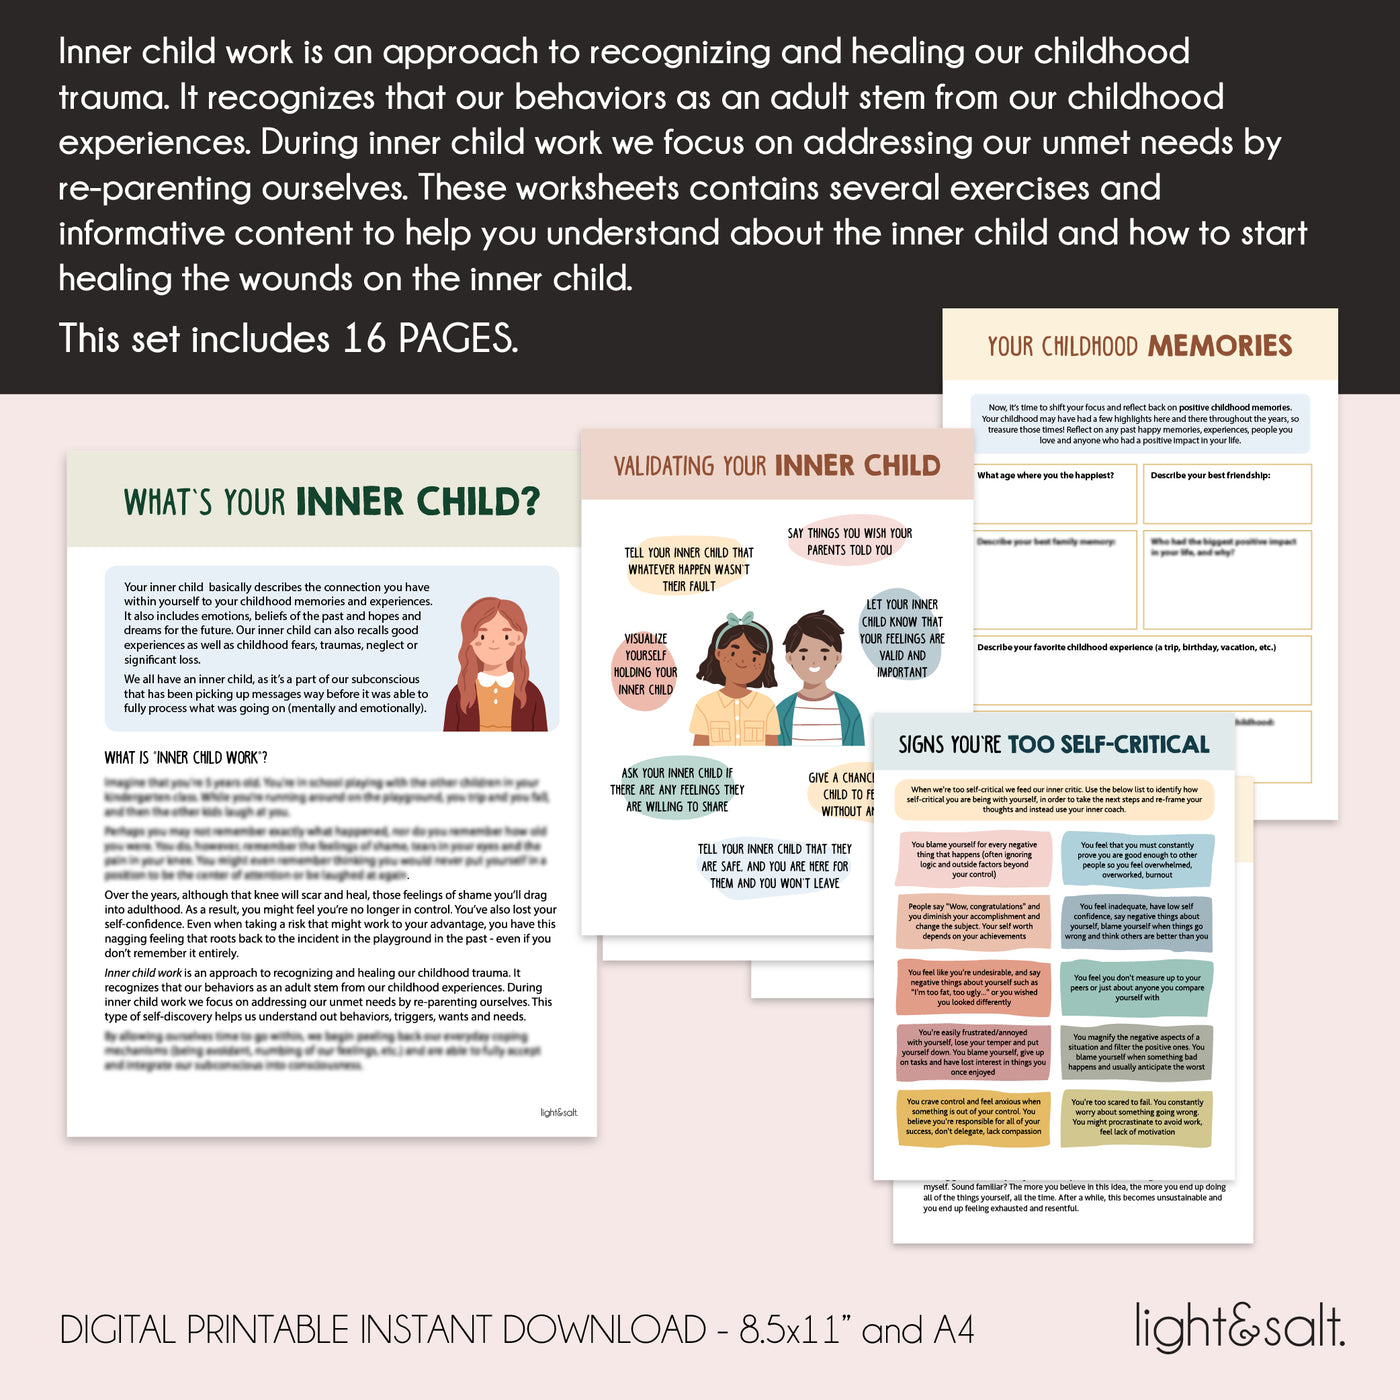 Reparenting your inner child worksheets